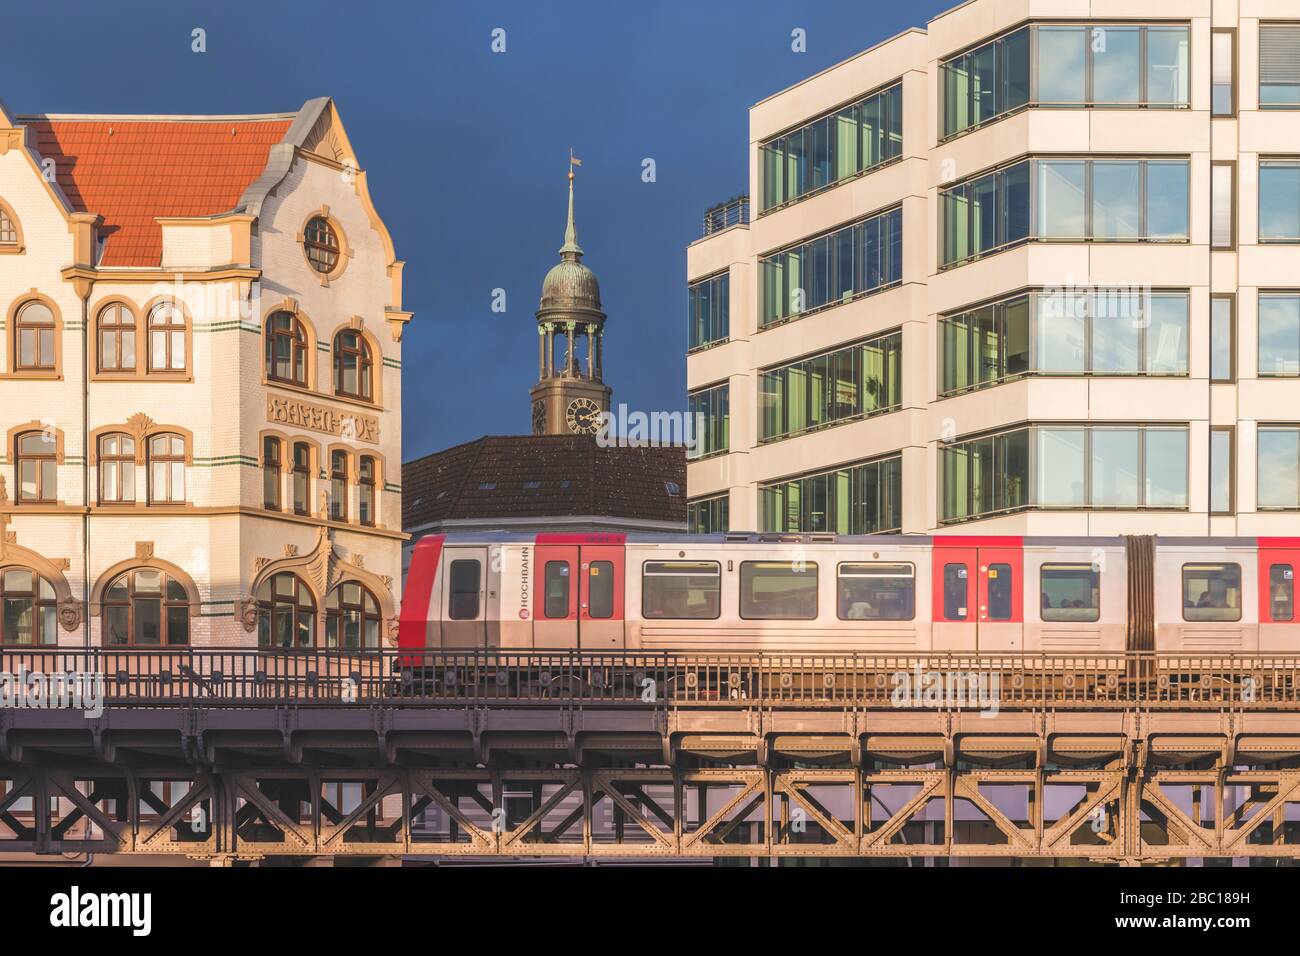 Germany, Hamburg, Elevated train with tower of Saint Michaels Church in background Stock Photo